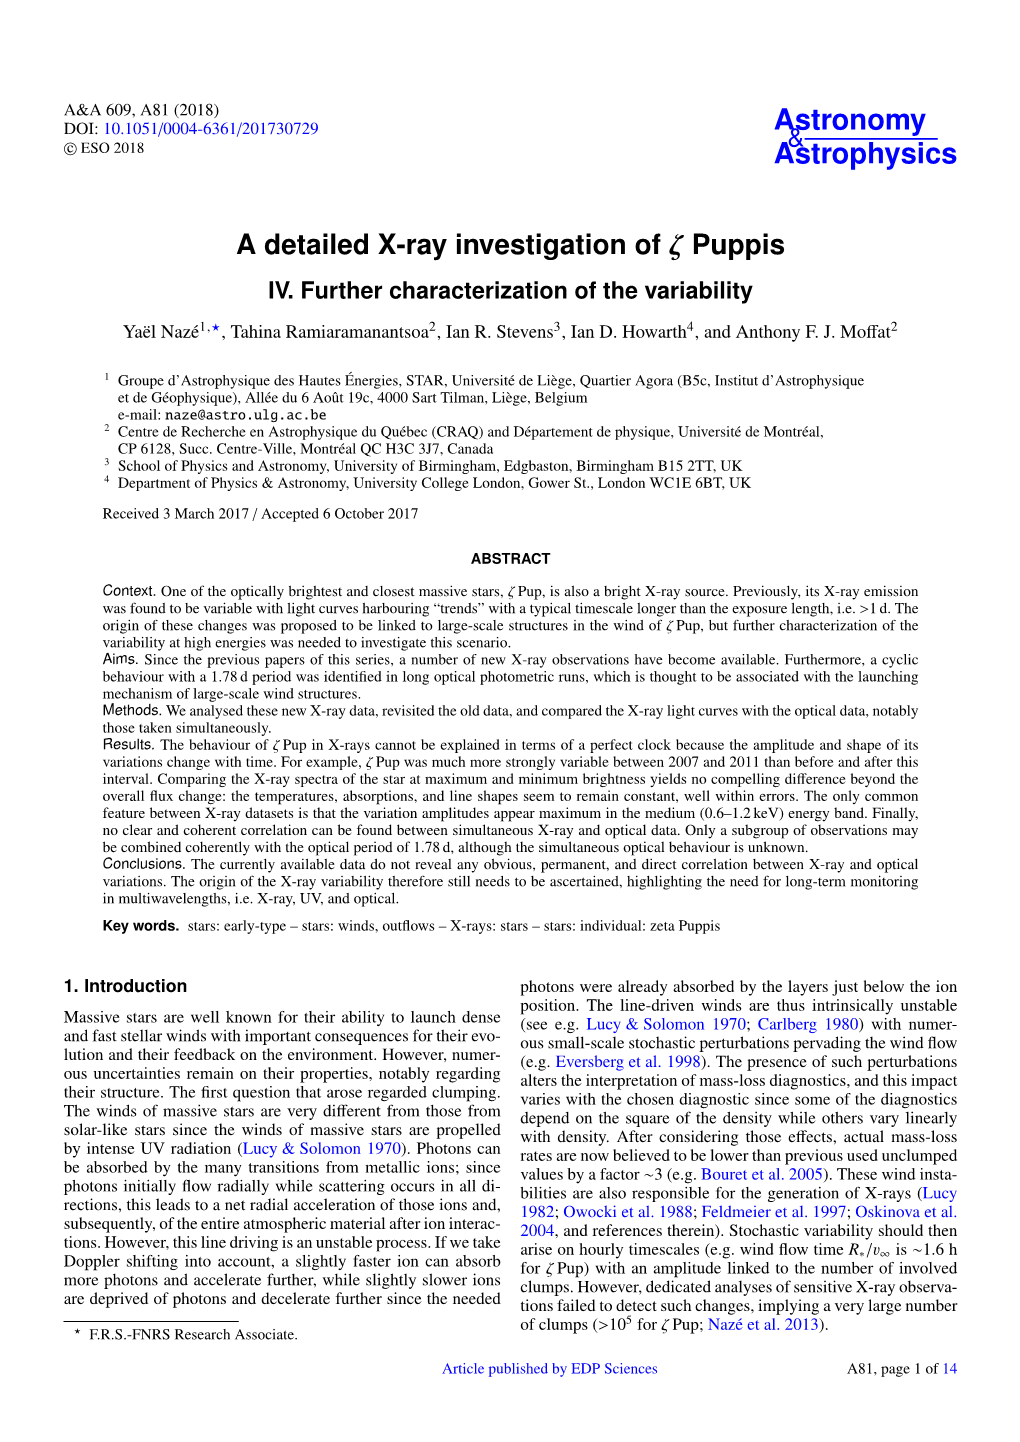 A Detailed X-Ray Investigation of Ζ Puppis IV